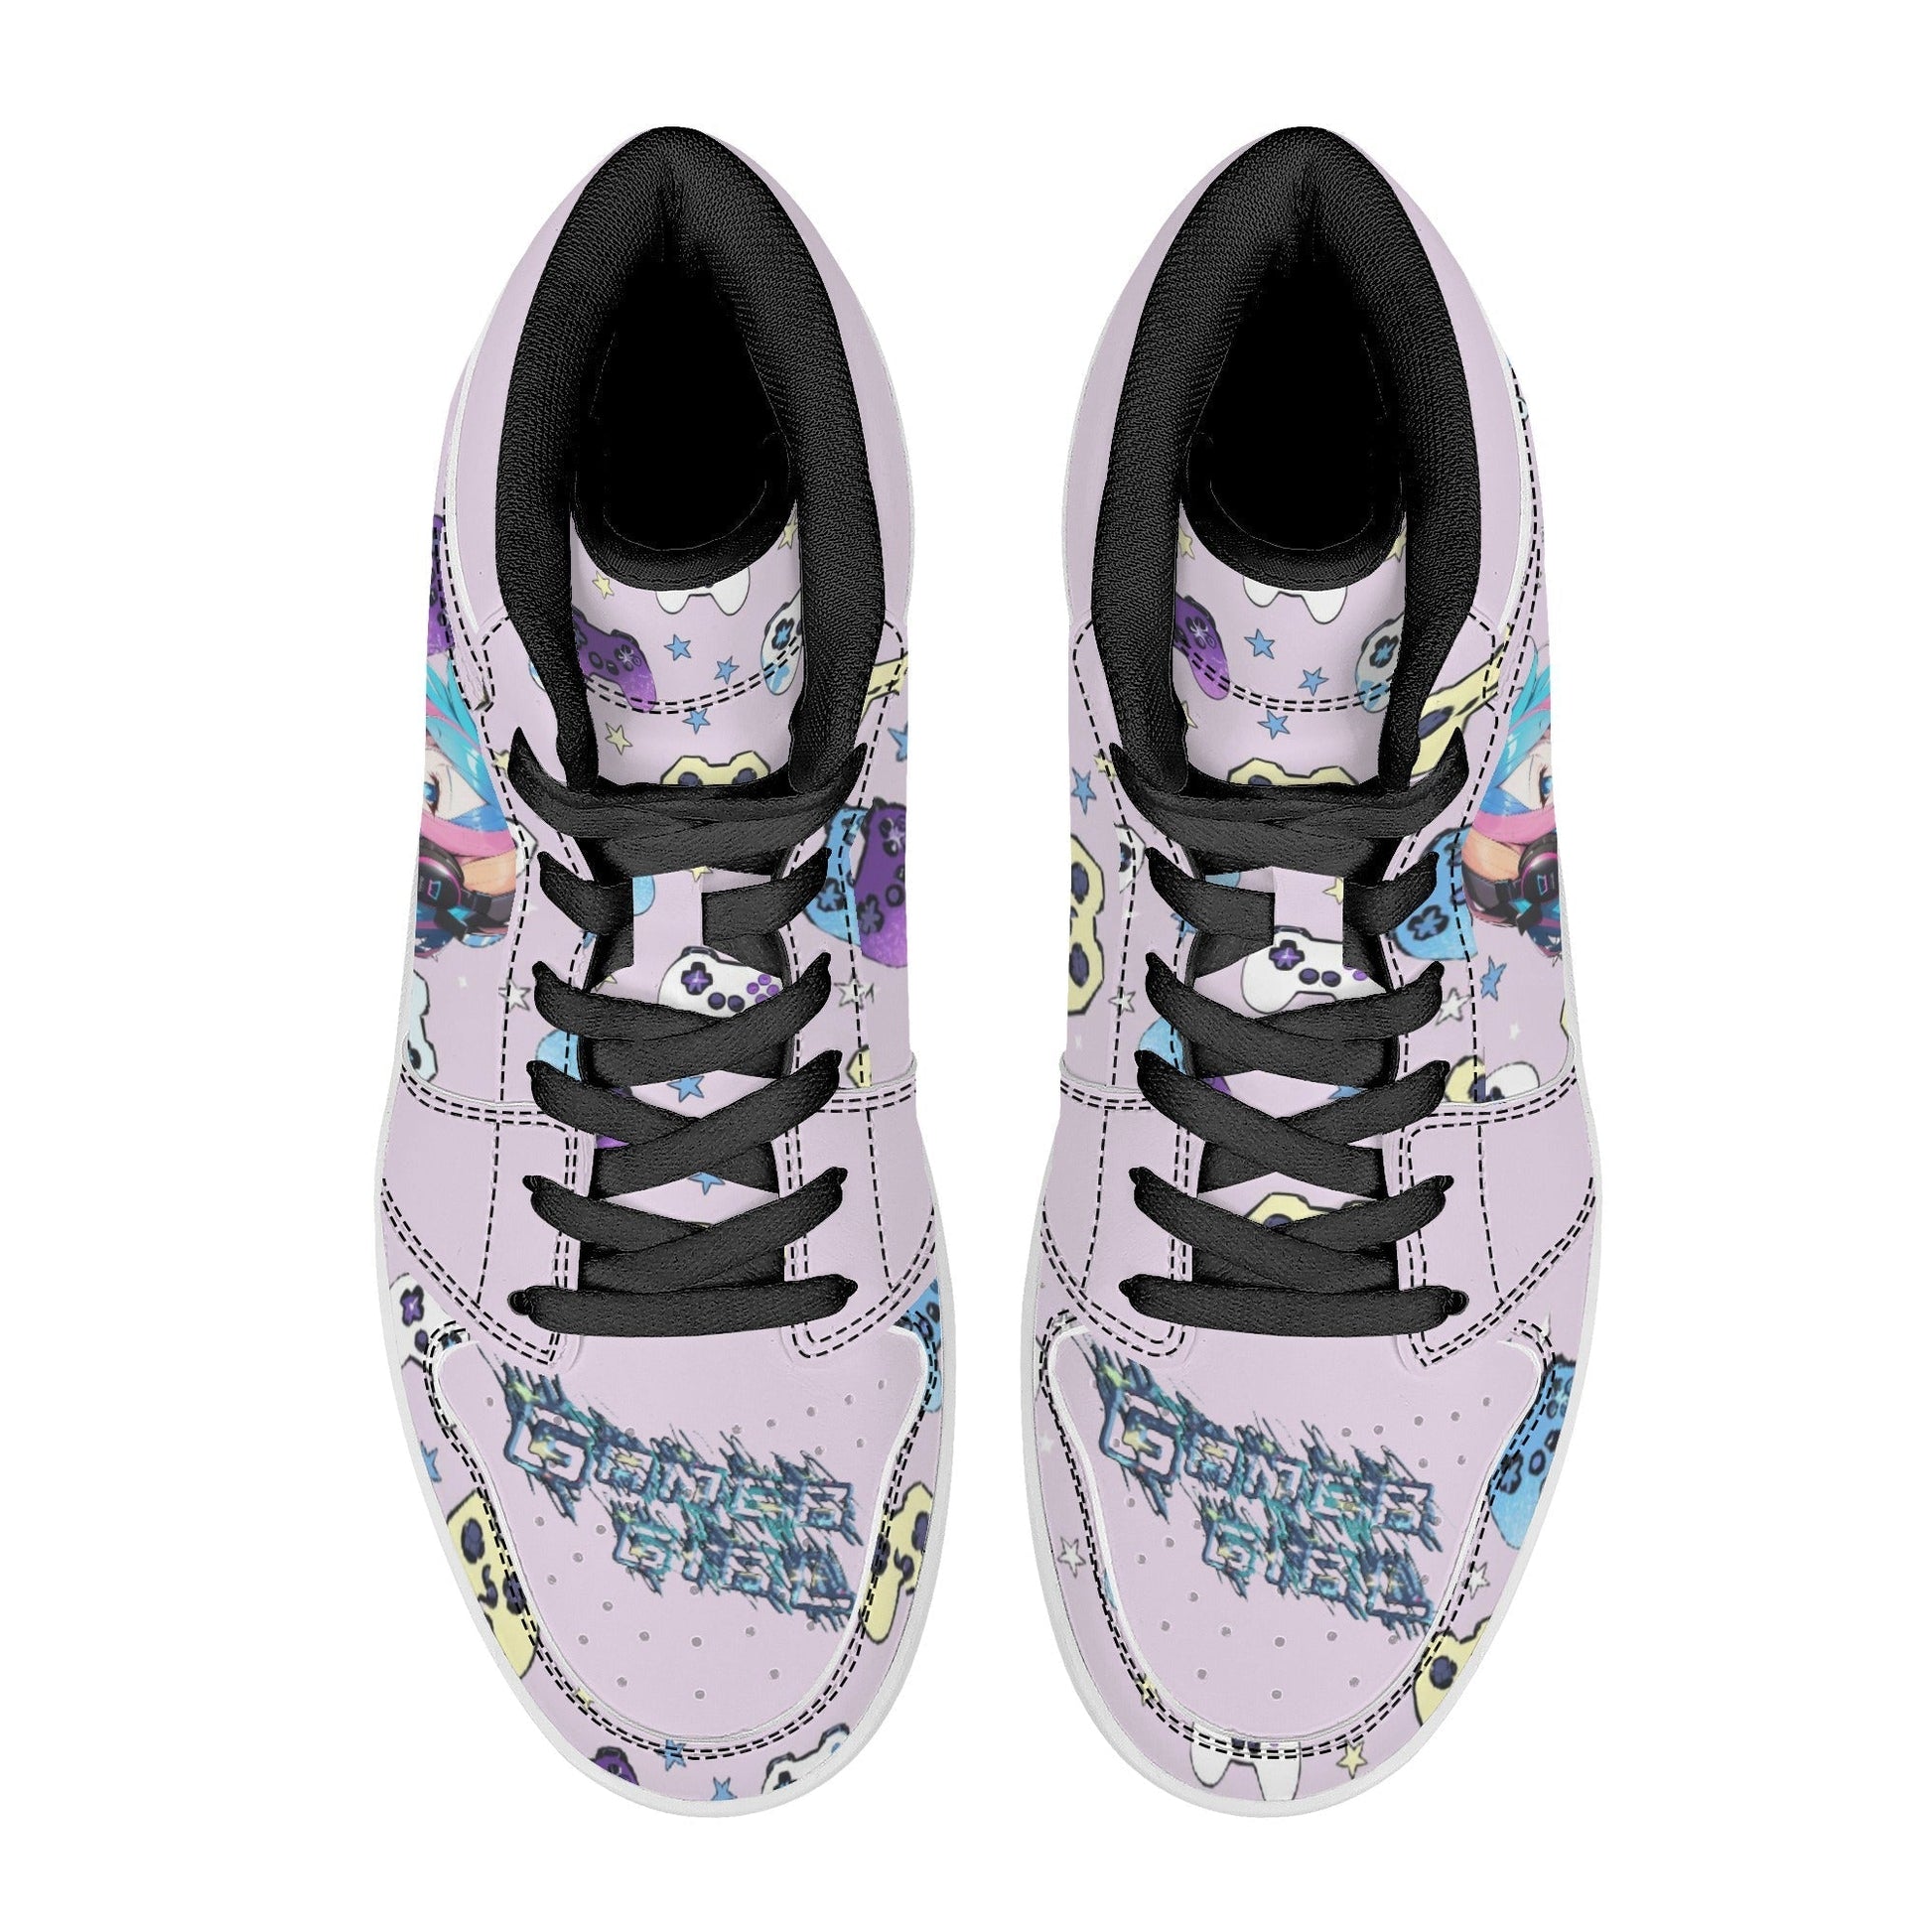 Stand out  with the  Gammer Girl Womens High Top Leather Sneakers  available at Hey Nugget. Grab yours today!